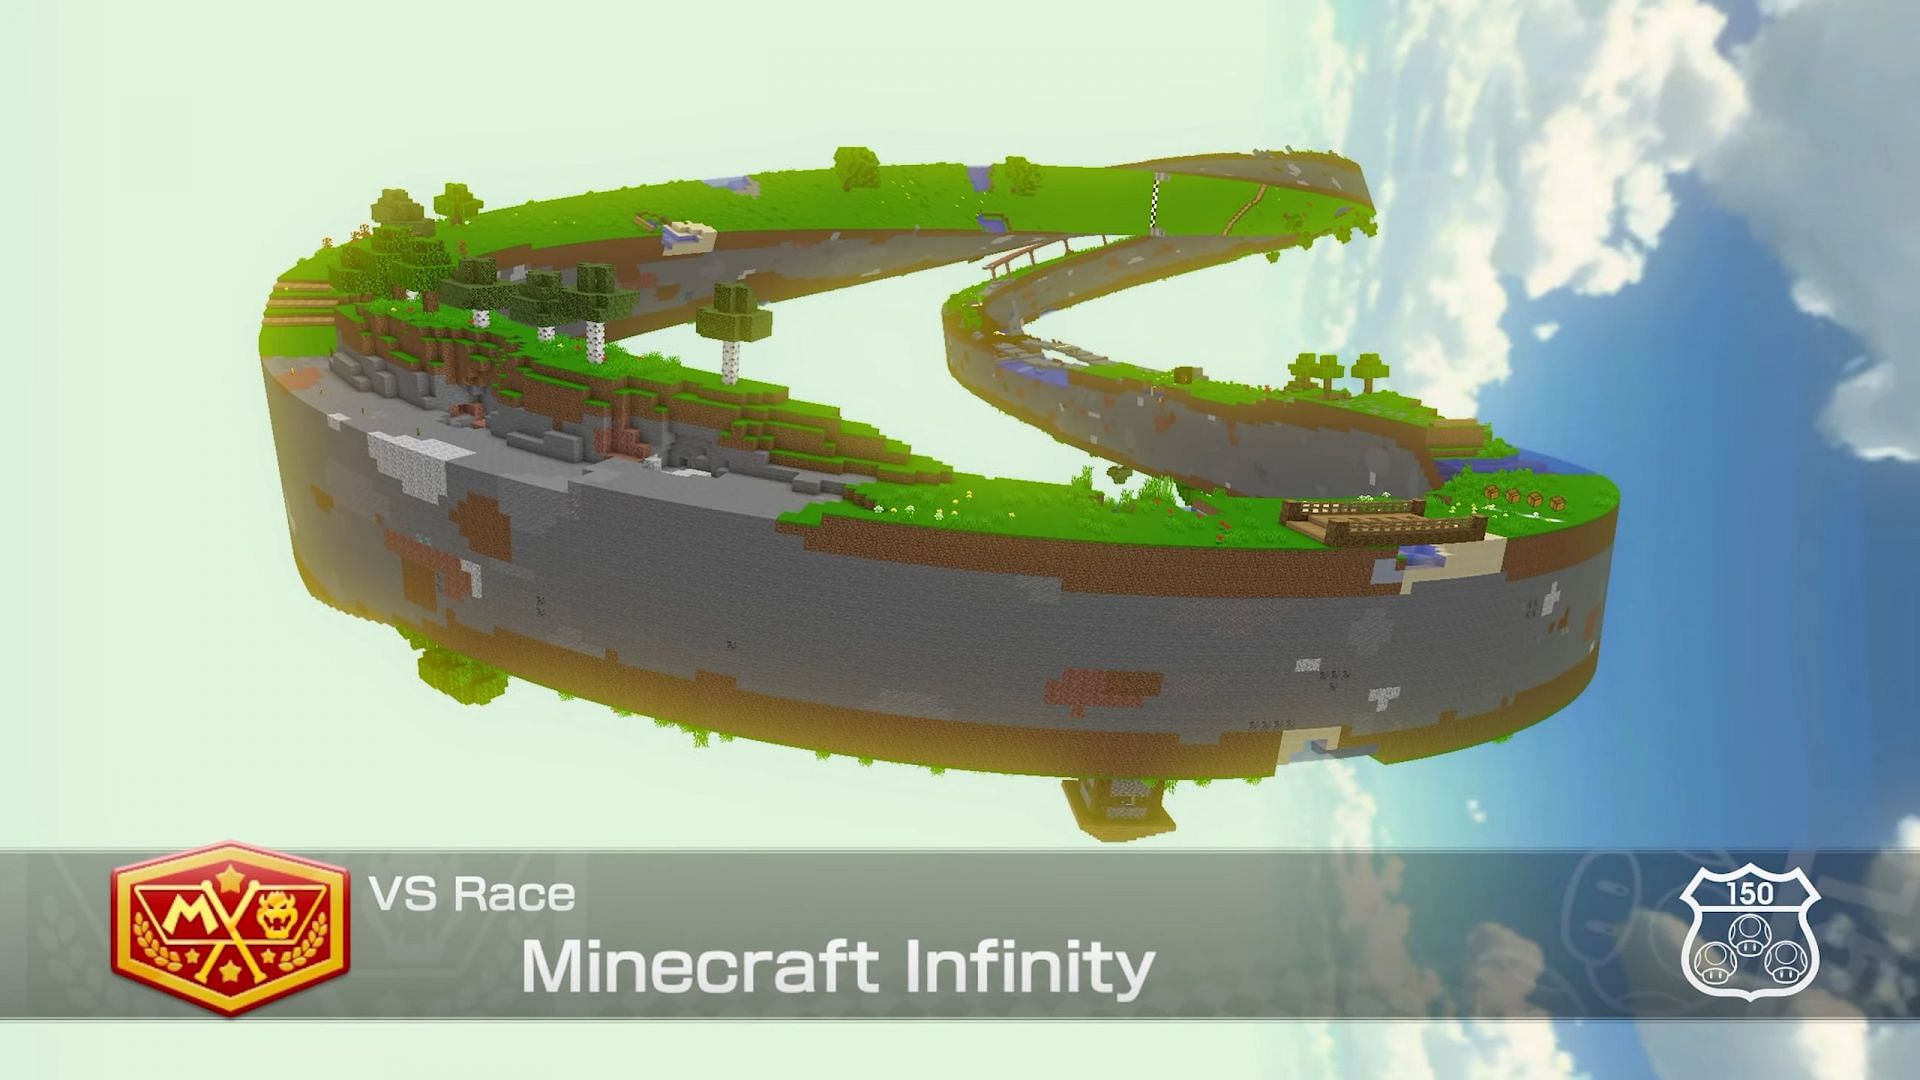 RiazorMC recently debuted their Minecraft-themed track for Mario Kart 8 (Image via RiazorMC/YouTube)